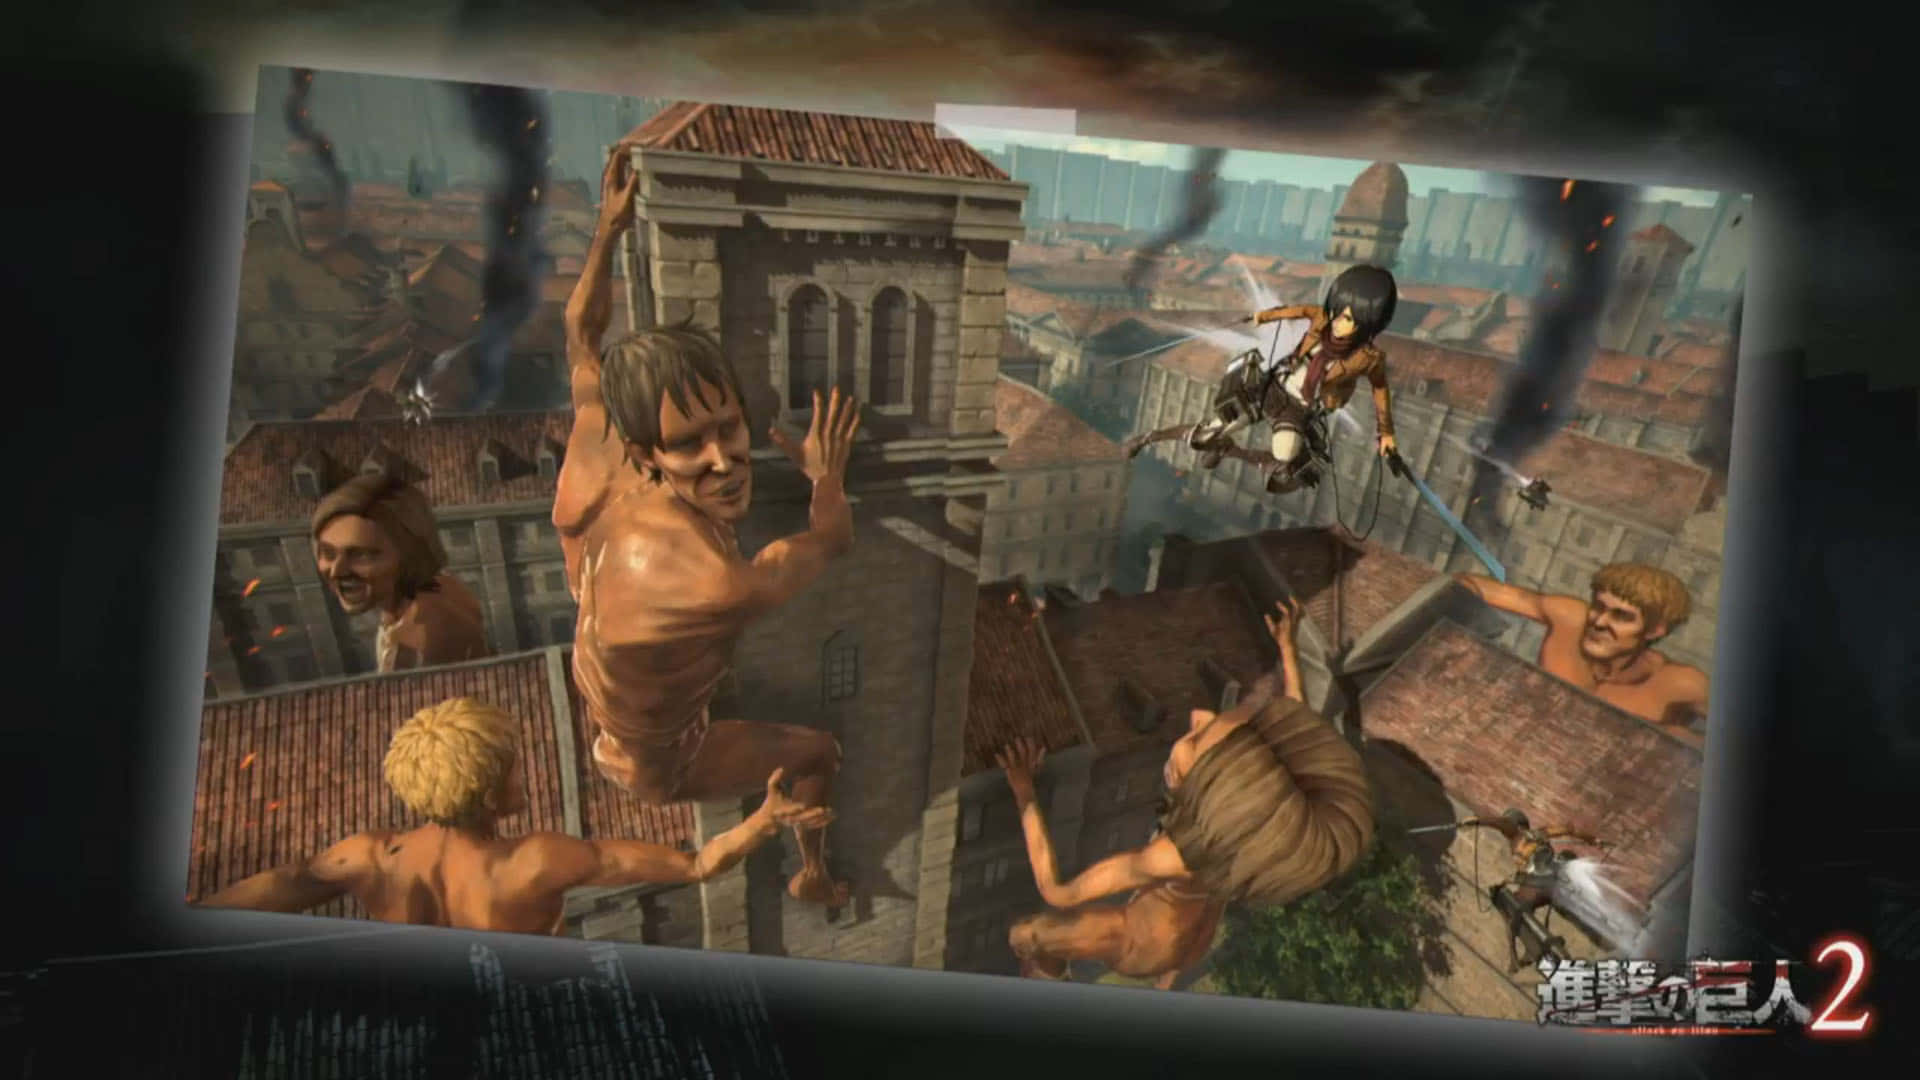 Attack on Titan video game - Fight with strength and courage Wallpaper